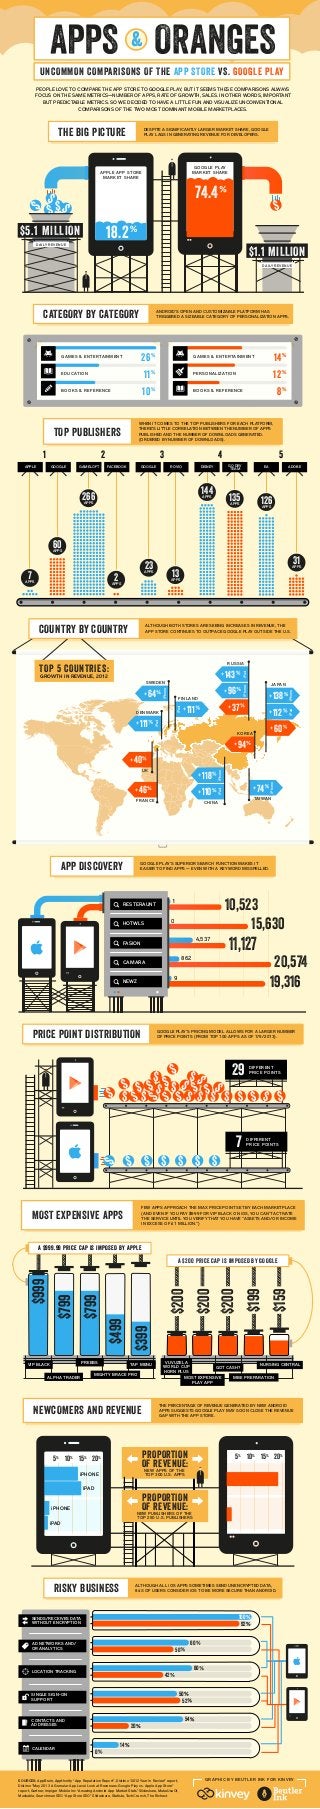 SOURCES: AppBrain, Appthority “App Reputation Report”, Distimo “2012 Year in Review” report,
Distimo ”May 2013 A Granular App Level Look at Revenues: Google Play vs. Apple App Store”
report, Gartner, Impiger Mobile Inc “Amazing Android App Market Stats” Slideshare, MakeUseOf,
Mashable, Searchman SEO “App Store SEO” Slideshare, Statista, TechCrunch, The Richest
GRAPHIC BY BEUTLER INK FOR KINVEY
SENDS/RECEIVES DATA
WITHOUT ENCRYPTION
AD NETWORKS AND/
OR ANALYTICS
LOCATION TRACKING
SINGLE SIGN-ON
SUPPORT
CONTACTS AND
ADDRESSES
CALENDAR
60
92
100
20
14
54
52
50
42
60
50
0
RISKY BUSINESS ALTHOUGH ALL iOS APPS SOMETIMES SEND UNENCRYPTED DATA,
84% OF USERS CONSIDER iOS TO BE MORE SECURE THAN ANDROID.
NEWCOMERS AND REVENUE
THE PERCENTAGE OF REVENUE GENERATED BY NEW ANDROID
APPS SUGGESTS GOOGLE PLAY MAY SOON CLOSE THE REVENUE
GAP WITH THE APP STORE.
PROPORTION
OF REVENUE:NEW APPS OF THE
TOP 300 U.S. APPS
PROPORTION
OF REVENUE:NEW PUBLISHERS OF THE
TOP 250 U.S. PUBLISHERS
10%
5%
15%
20%
iPHONE
iPAD
iPHONE
iPAD
10%
5%
15%
20%
$999
$799
$499
$399
$799
A $999.99 PRICE CAP IS IMPOSED BY APPLE
$200
$200
$200
A $200 PRICE CAP IS IMPOSED BY GOOGLE
$199
$159
VIP BLACK
ALPHA TRADER
PREEBS
MIGHTY BRACE PRO
TAP MENU
MOST EXPENSIVE
PLAY APP
GOT CASH?
MBE PREPARATION
NURSING CENTRAL
VUVUZELA
WORLD CUP
HORN PLUS
MOST EXPENSIVE APPS
FEW APPS APPROACH THE MAX PRICE POINT SET BY EACH MARKETPLACE
(AND EVEN IF YOU PAY $999 FOR VIP BLACK ON iOS, YOU CAN'T ACTIVATE
THE SERVICE UNTIL YOU VERIFY THAT YOU HAVE "ASSETS AND/OR INCOME
IN EXCESS OF £1 MILLION.")
PRICE POINT DISTRIBUTION GOOGLE PLAY'S PRICING MODEL ALLOWS FOR A LARGER NUMBER
OF PRICE POINTS (FROM TOP 100 APPS AS OF 7/9/2013).
DIFFERENT
PRICE POINTS7
DIFFERENT
PRICE POINTS29
APP DISCOVERY GOOGLE PLAY'S SUPERIOR SEARCH FUNCTION MAKES IT
EASIER TO FIND APPS — EVEN WITH A KEYWORD MISSPELLED.
4,537
11,127
1
0
862
20,574
9
19,316
10,523
15,630
RESTERAUNT
FASION
CAMARA
NEWZ
HOTWLS
+ 112
iPad
+ 138
iPhone
+ 46 + 110
iPad
+ 118
iPhone
+ 37
+ 143
+ 96
iPhone
RUSSIA
CHINA
+ 94
KOREA
+ 74
TAIWAN
+ 60
JAPAN
FRANCE
+ 40
UK
+ 111
iPad
FINLAND
SWEDEN
iPad
iPhone
+ 64
DENMARK
+ 111
iPad
iPhone
TOP 5 COUNTRIES:
GROWTH IN REVENUE, 2012
COUNTRY BY COUNTRY ALTHOUGH BOTH STORES ARE SEEING INCREASES IN REVENUE, THE
APP STORE CONTINUES TO OUTPACE GOOGLE PLAY OUTSIDE THE U.S.
WHEN IT COMES TO THE TOP PUBLISHERS FOR EACH PLATFORM,
THERE'S LITTLE CORRELATION BETWEEN THE NUMBER OF APPS
PUBLISHED AND THE NUMBER OF DOWNLOADS GENERATED.
(ORDERED BY NUMBER OF DOWNLOADS).
266APPS
2APPS
23APPS
13APPS
144APPS
135APPS 126APPS
31APPS
7APPS
60APPS
1 2 3 4 5
APPLE GOOGLE GAMELOFT FACEBOOK GOOGLE ROVIO DISNEY GO DEV
TEAM EA ADOBE
TOP PUBLISHERS
CATEGORY BY CATEGORY ANDROID'S OPEN AND CUSTOMIZABLE PLATFORM HAS
TRIGGERED A SIZEABLE CATEGORY OF PERSONALIZATION APPS.
GAMES & ENTERTAINMENT
EDUCATION
BOOKS & REFERENCE
26
11
10
14
12
8
GAMES & ENTERTAINMENT
PERSONALIZATION
BOOKS & REFERENCE
THE BIG PICTURE DESPITE A SIGNIFICANTLY LARGER MARKET SHARE, GOOGLE
PLAY LAGS IN GENERATING REVENUE FOR DEVELOPERS.
$5.1 MILLION
GOOGLE PLAY
MARKET SHAREAPPLE APP STORE
MARKET SHARE
74.4
18.2
$1.1 MILLION
DAILY REVENUE
$5.1 MILLION
DAILY REVENUE
PEOPLE LOVE TO COMPARE THE APP STORE TO GOOGLE PLAY, BUT IT SEEMS THESE COMPARISONS ALWAYS
FOCUS ON THE SAME METRICS—NUMBER OF APPS, RATE OF GROWTH, SALES. IN OTHER WORDS, IMPORTANT
BUT PREDICTABLE METRICS. SO WE DECIDED TO HAVE A LITTLE FUN AND VISUALIZE UNCONVENTIONAL
COMPARISONS OF THE TWO MOST DOMINANT MOBILE MARKETPLACES.
&
UNCOMMON COMPARISONS OF THE APP STORE VS. GOOGLE PLAY
 